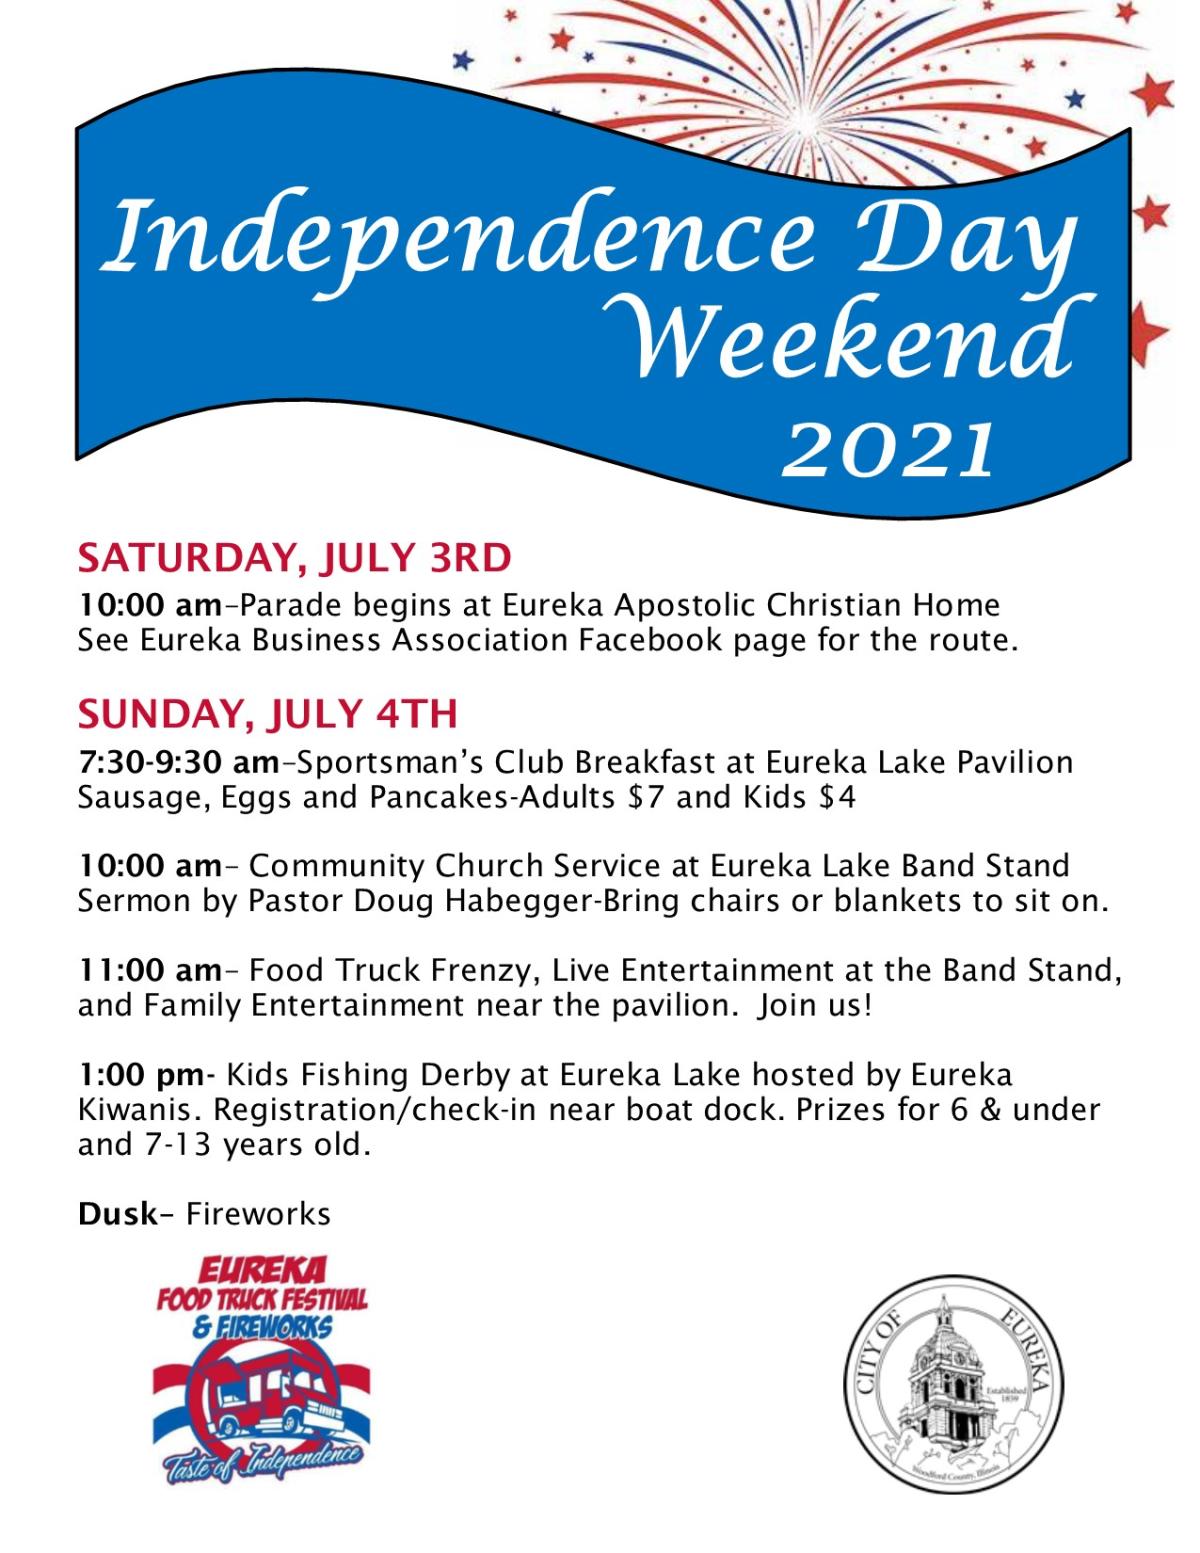 July 3rd and 4th activities